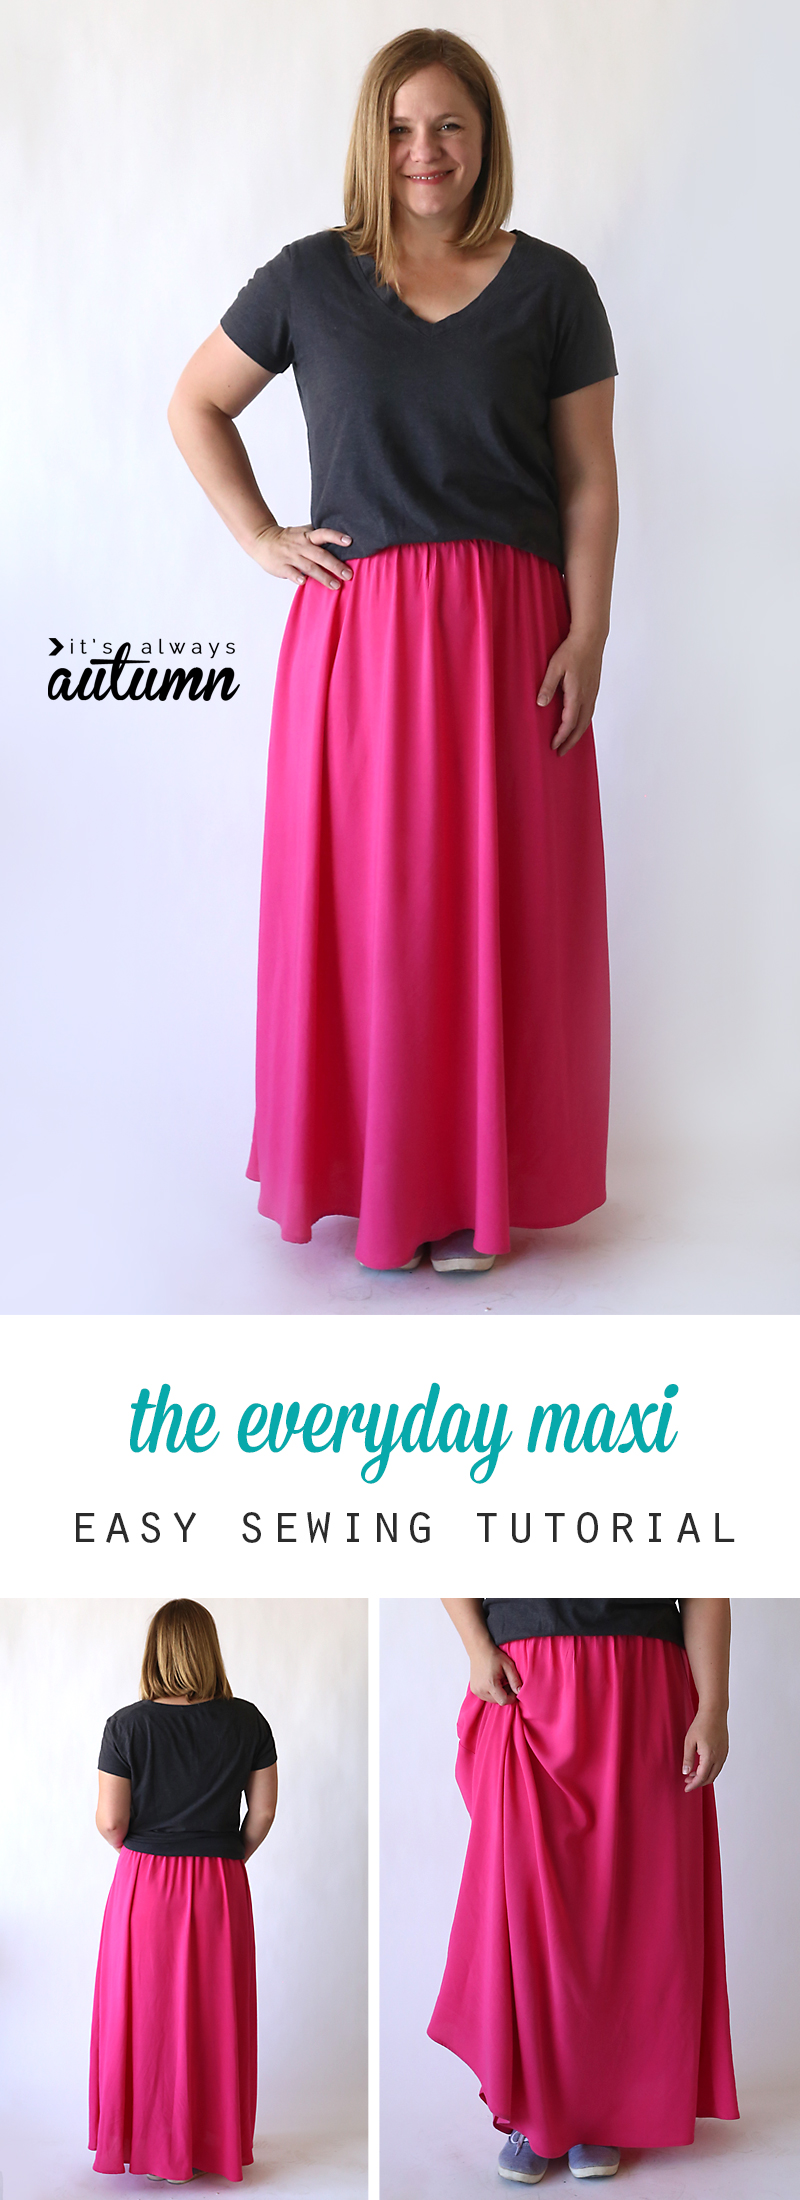 the everyday maxi skirt | easy sewing tutorial - It's Always Autumn